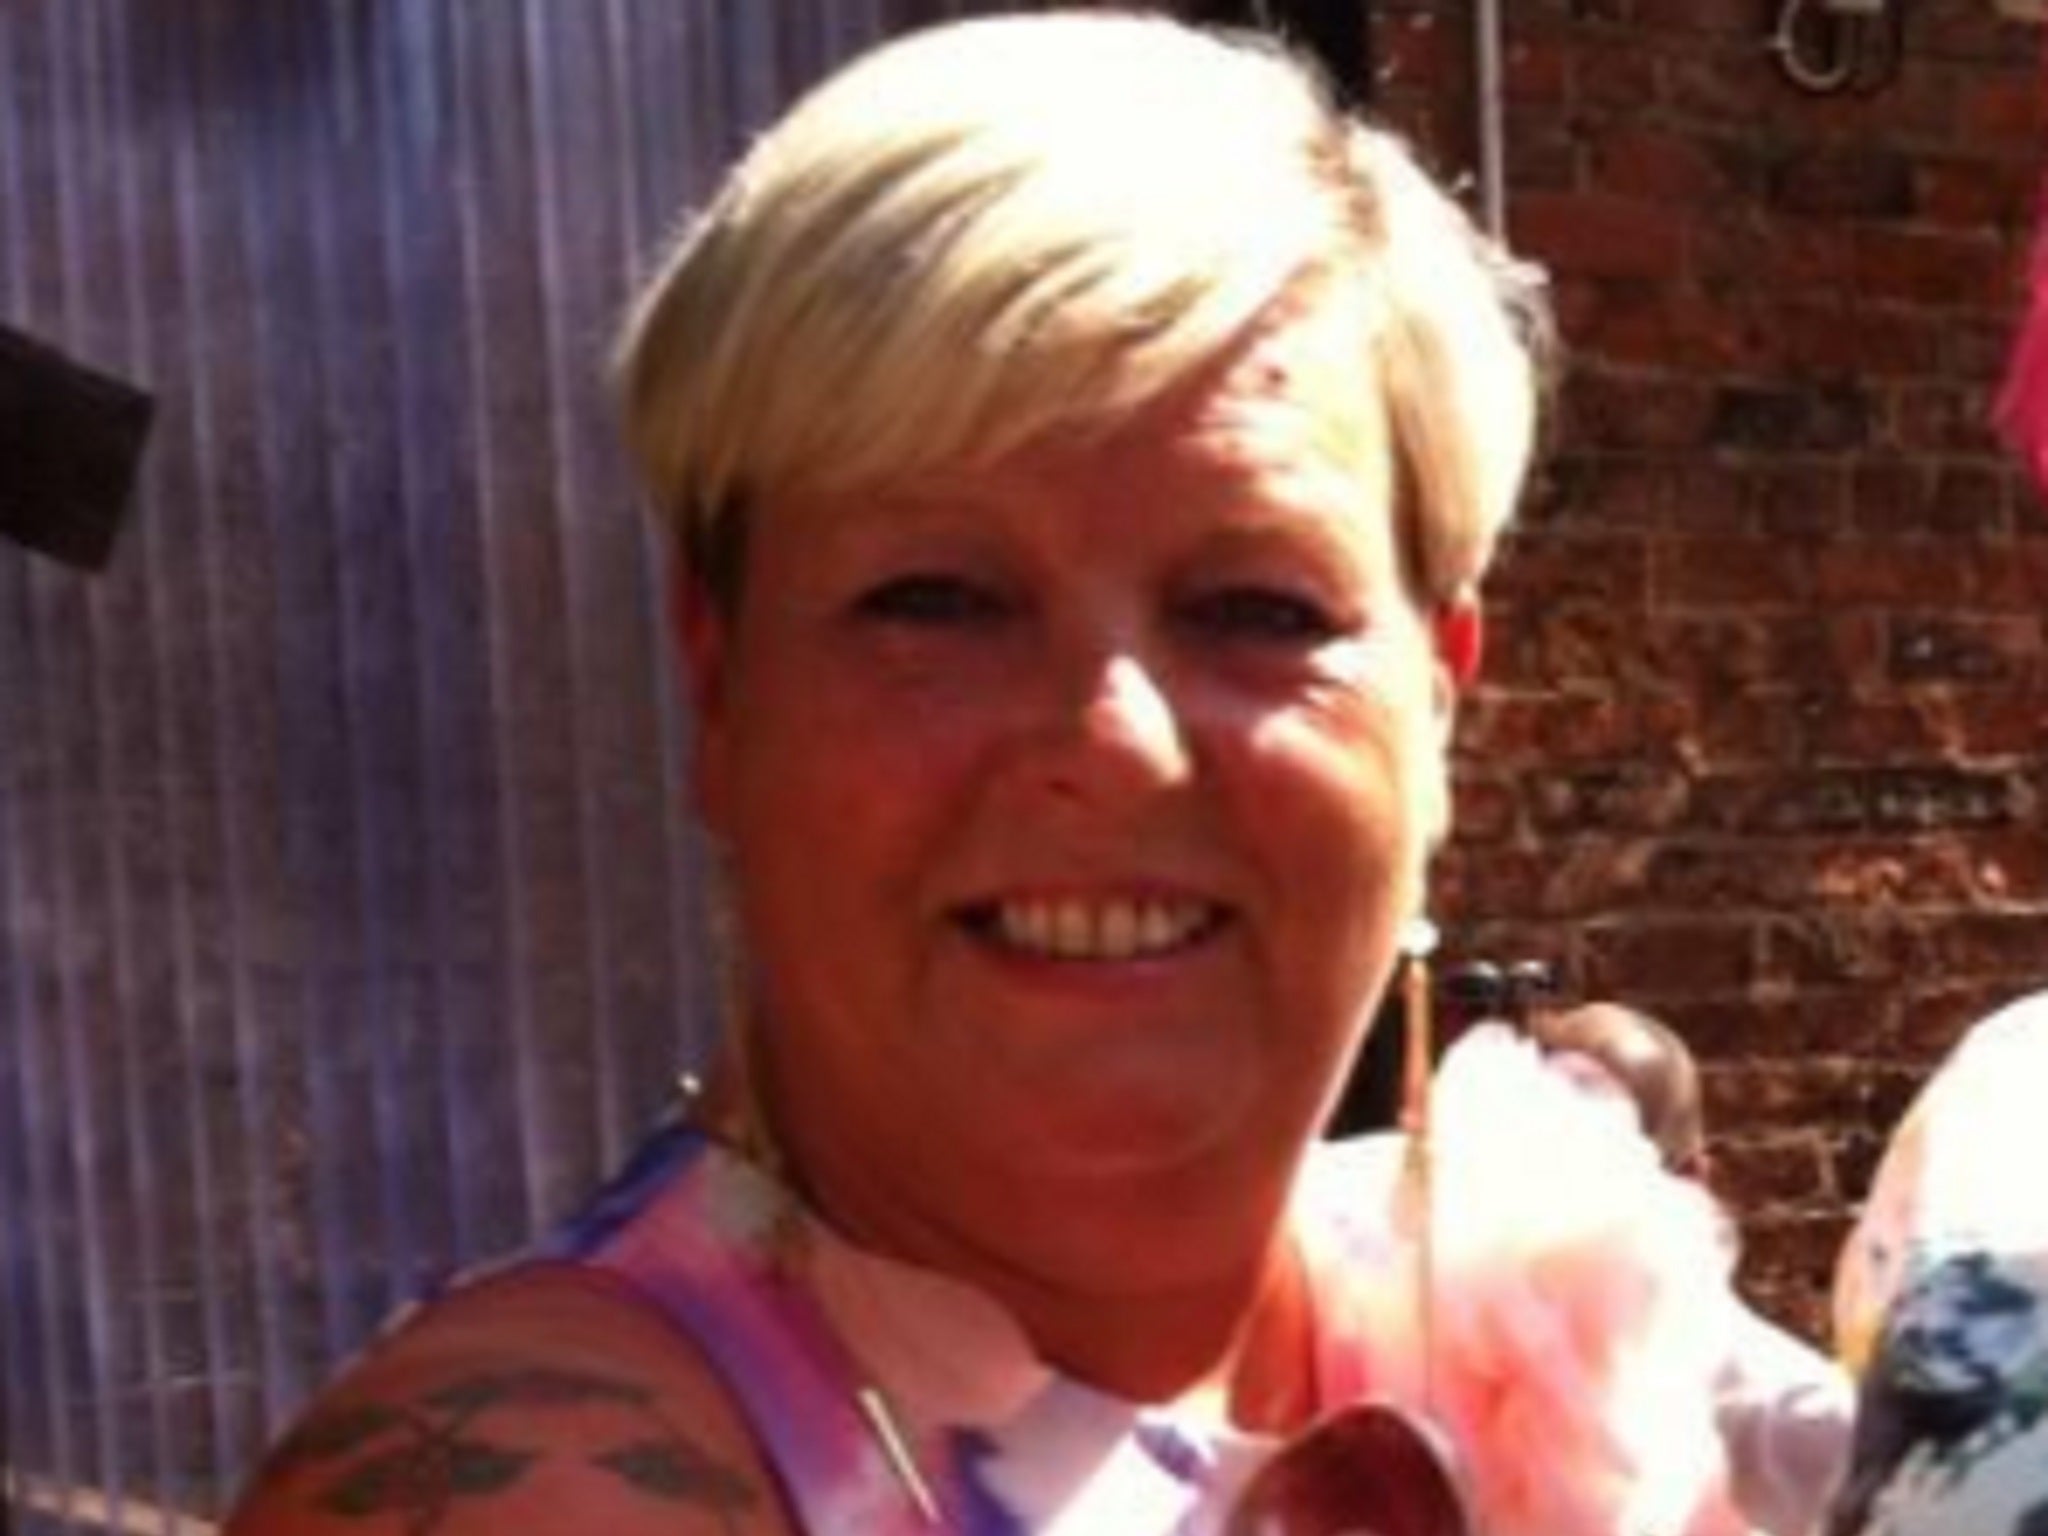 Julie Phillips, 51, was found guilty of ripping up a Koran during a Middlesbrough away match